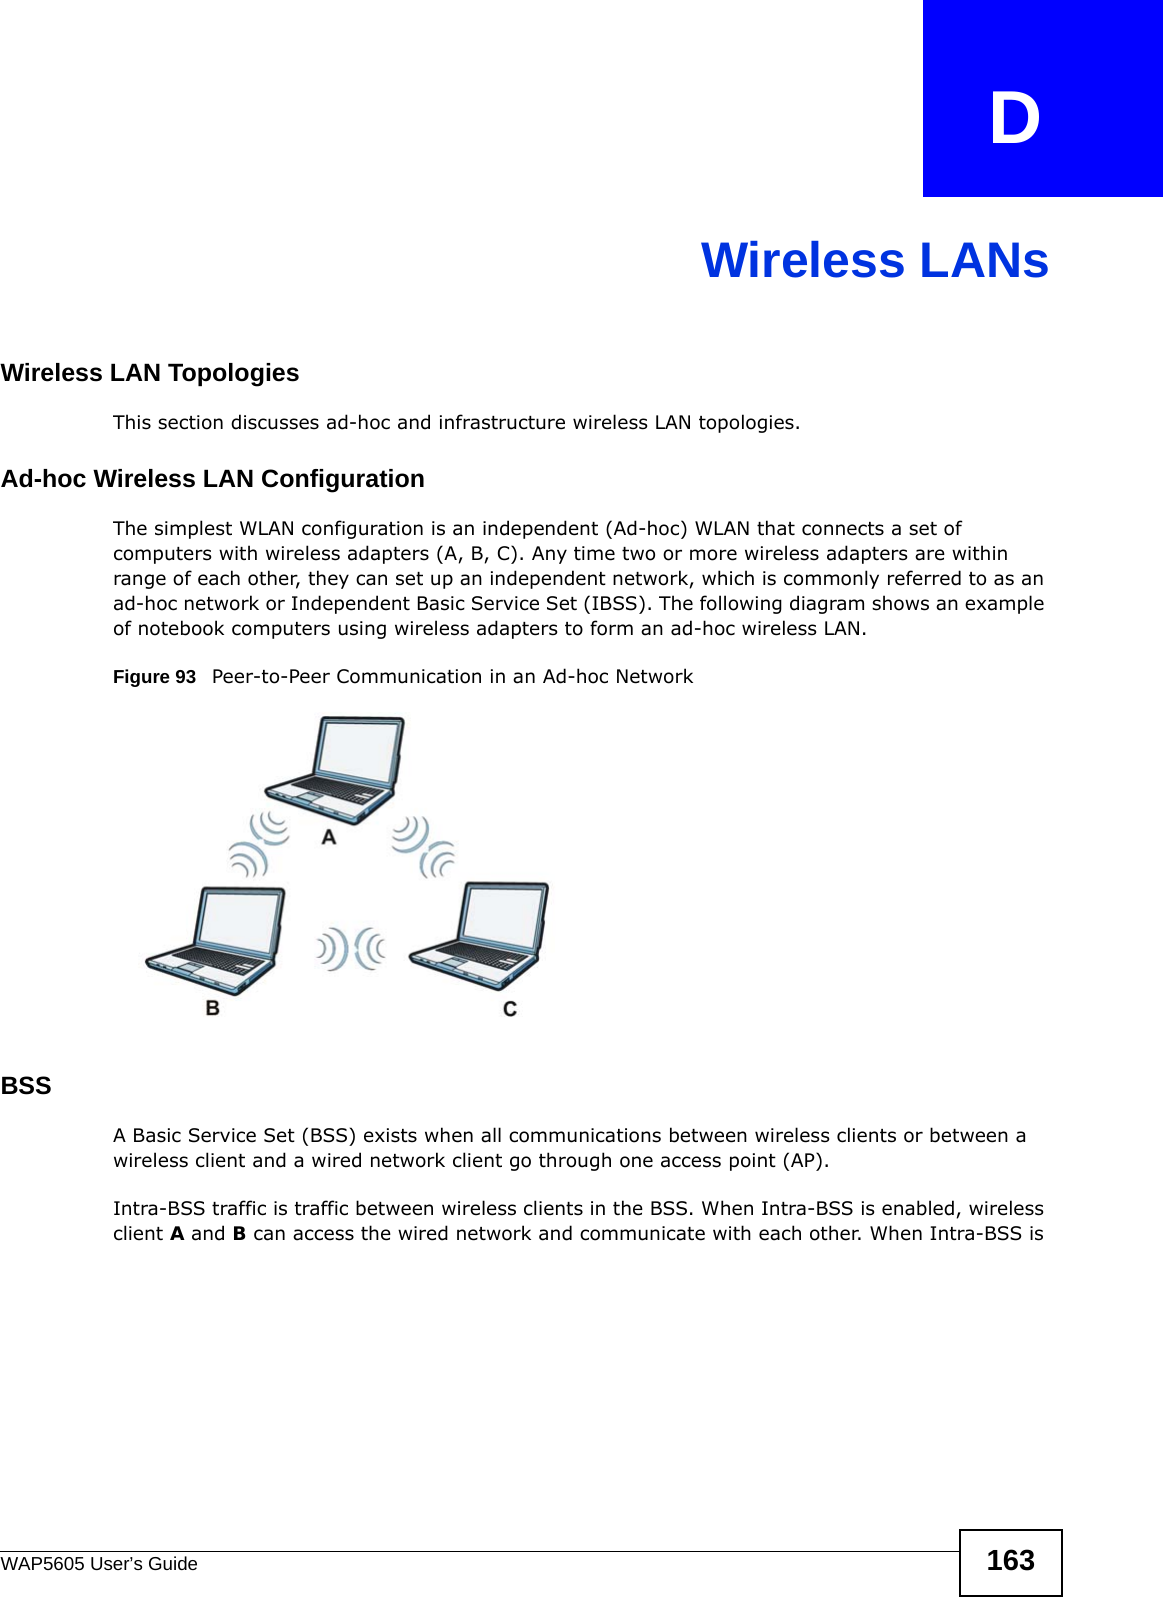 WAP5605 User’s Guide 163APPENDIX   DWireless LANsWireless LAN TopologiesThis section discusses ad-hoc and infrastructure wireless LAN topologies.Ad-hoc Wireless LAN ConfigurationThe simplest WLAN configuration is an independent (Ad-hoc) WLAN that connects a set of computers with wireless adapters (A, B, C). Any time two or more wireless adapters are within range of each other, they can set up an independent network, which is commonly referred to as an ad-hoc network or Independent Basic Service Set (IBSS). The following diagram shows an example of notebook computers using wireless adapters to form an ad-hoc wireless LAN. Figure 93   Peer-to-Peer Communication in an Ad-hoc NetworkBSSA Basic Service Set (BSS) exists when all communications between wireless clients or between a wireless client and a wired network client go through one access point (AP). Intra-BSS traffic is traffic between wireless clients in the BSS. When Intra-BSS is enabled, wireless client A and B can access the wired network and communicate with each other. When Intra-BSS is 